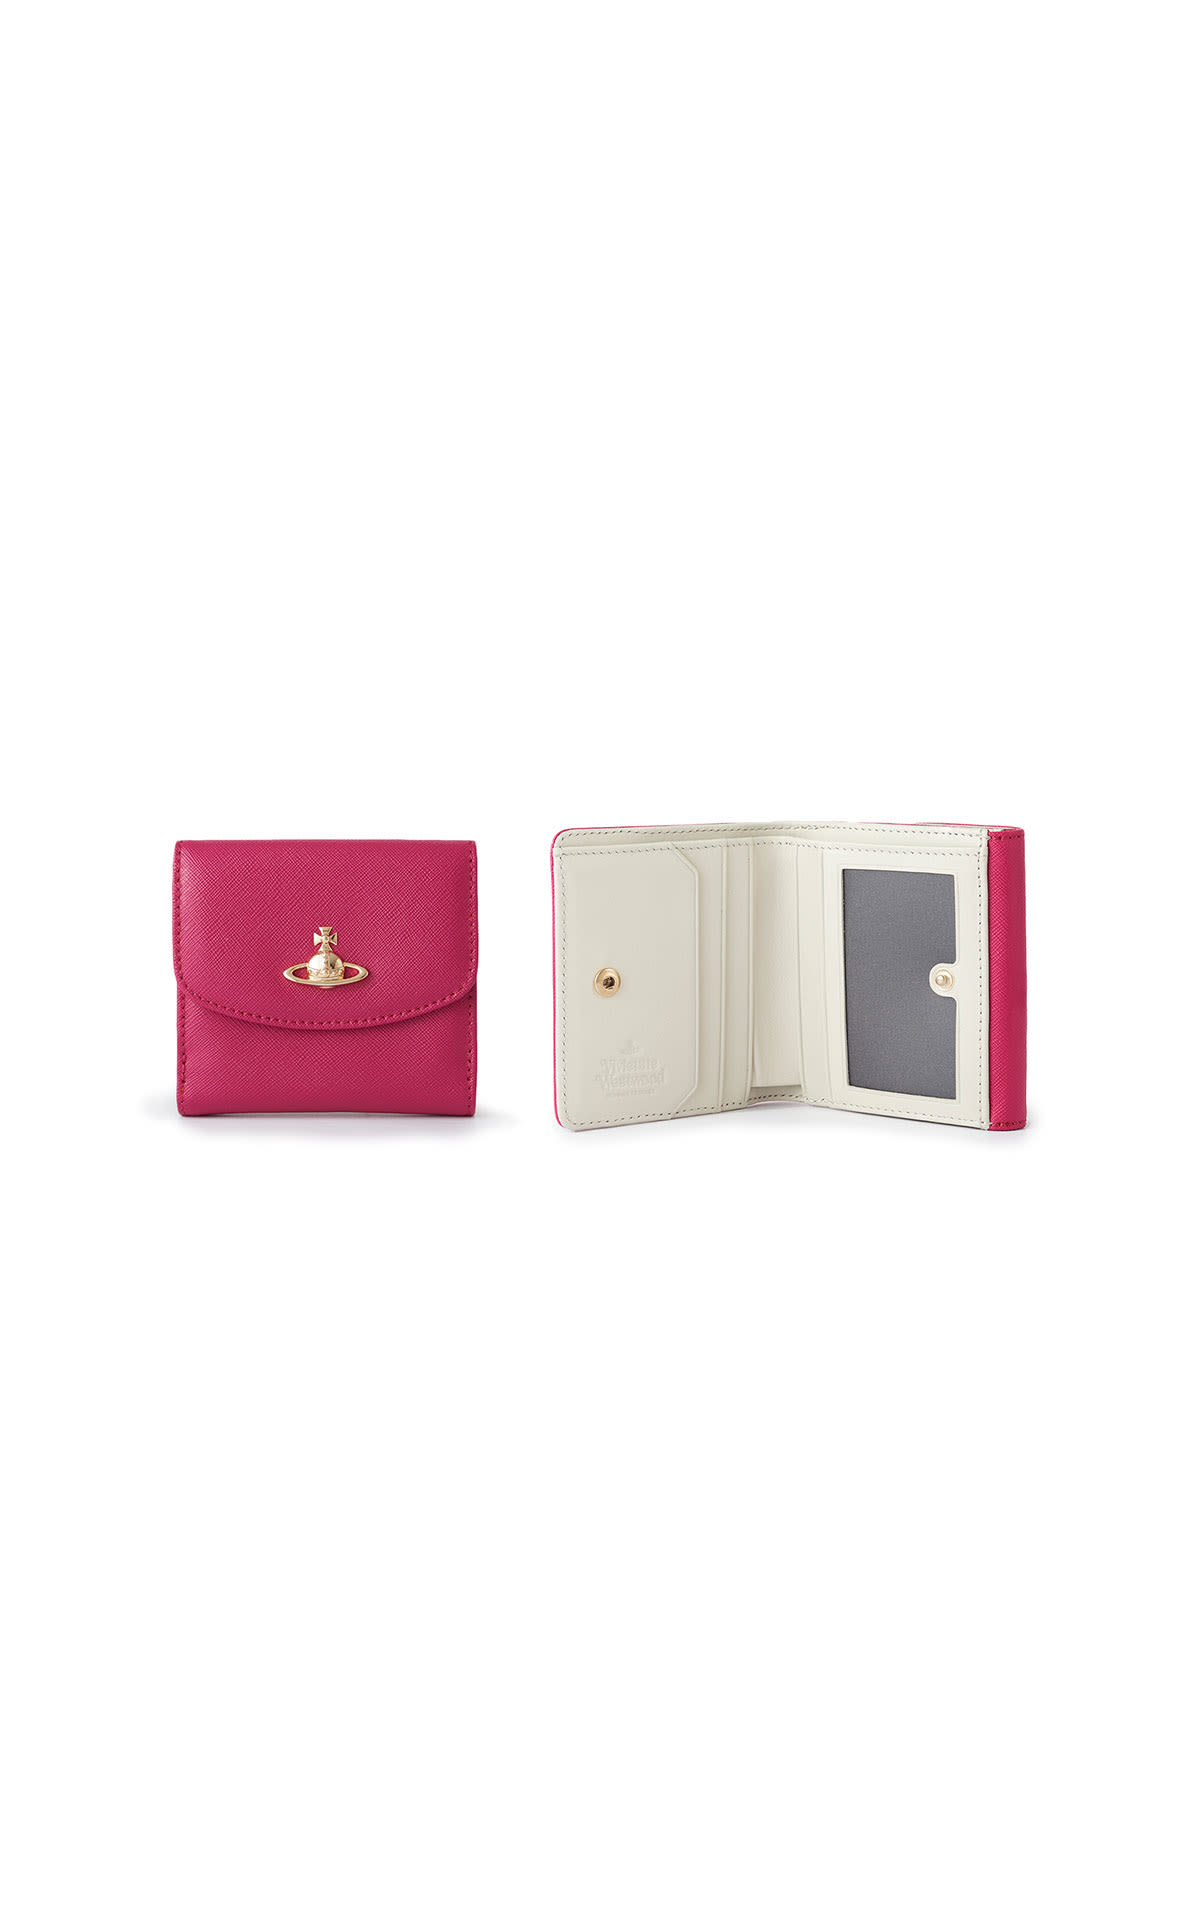 Vivienne Westwood Victoria small wallet from Bicester Village